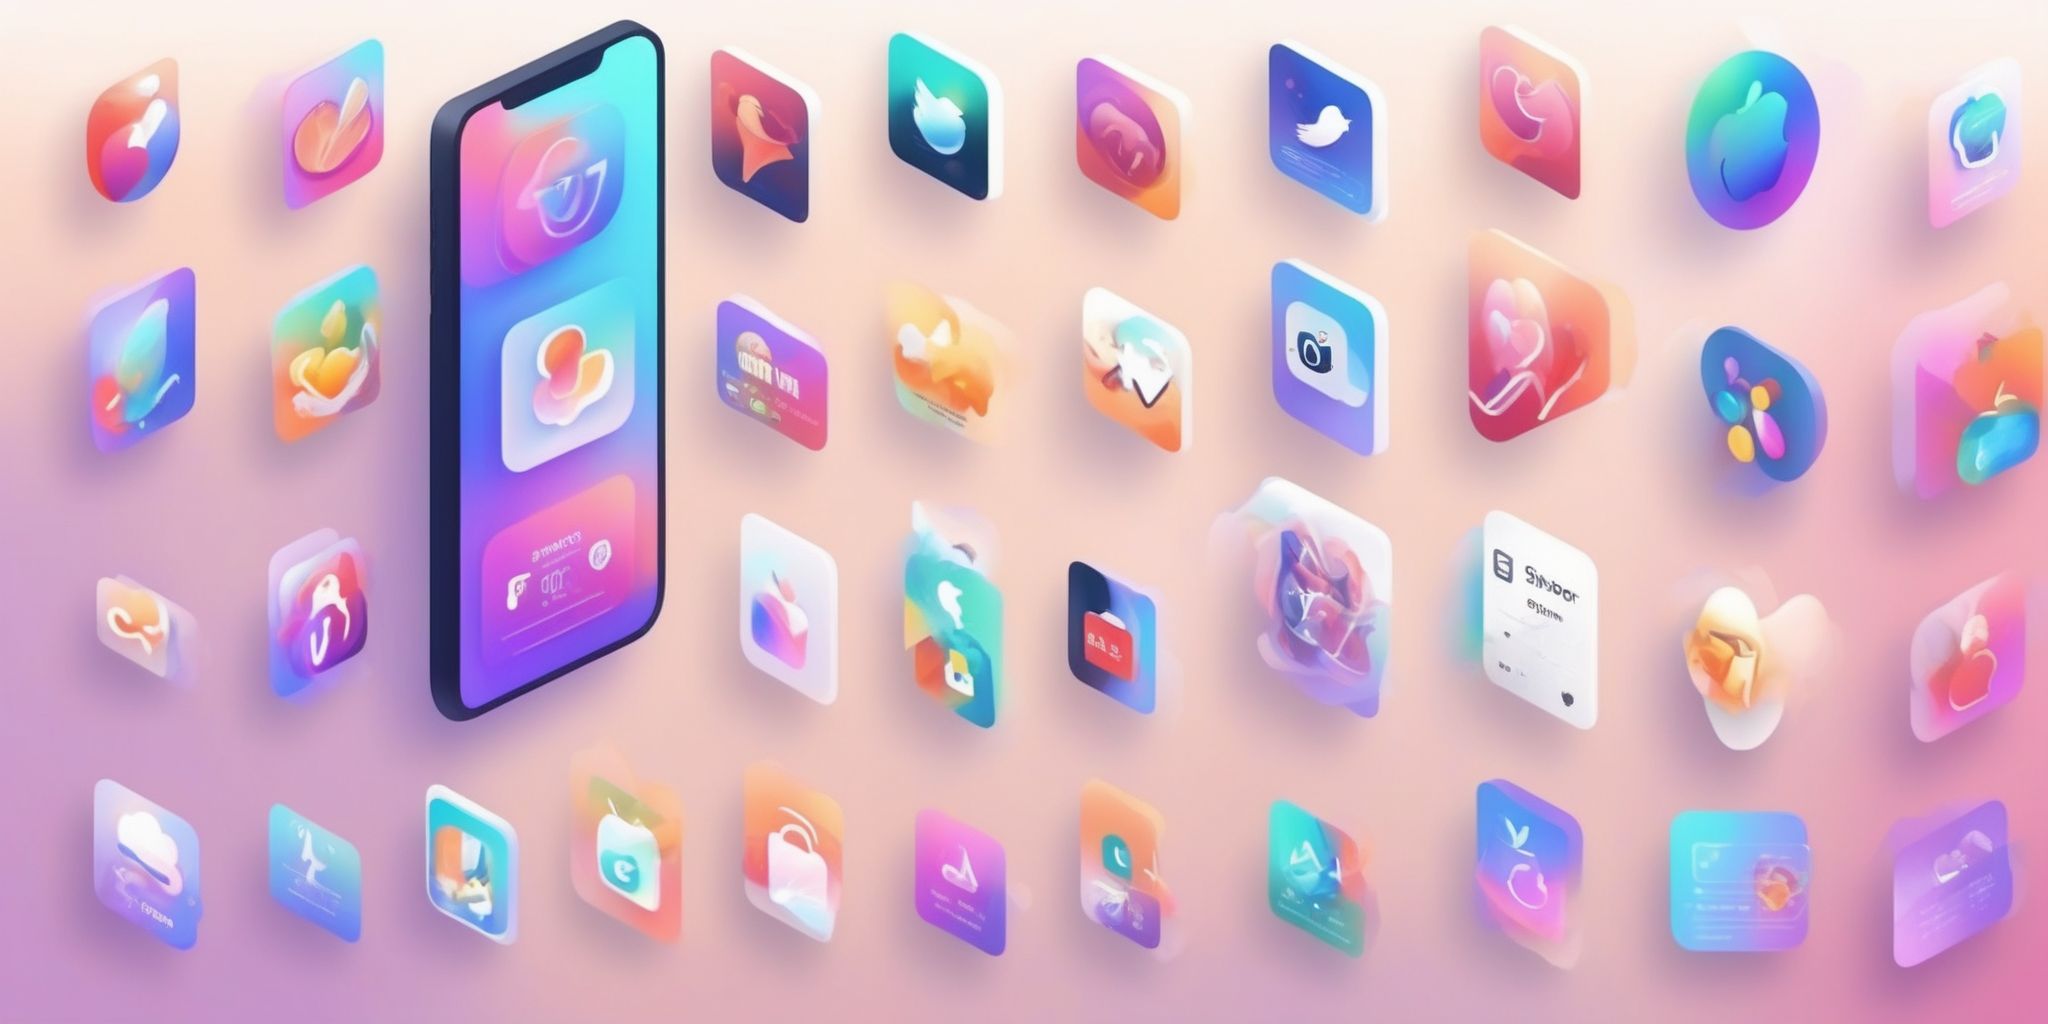 App store in illustration style with gradients and white background